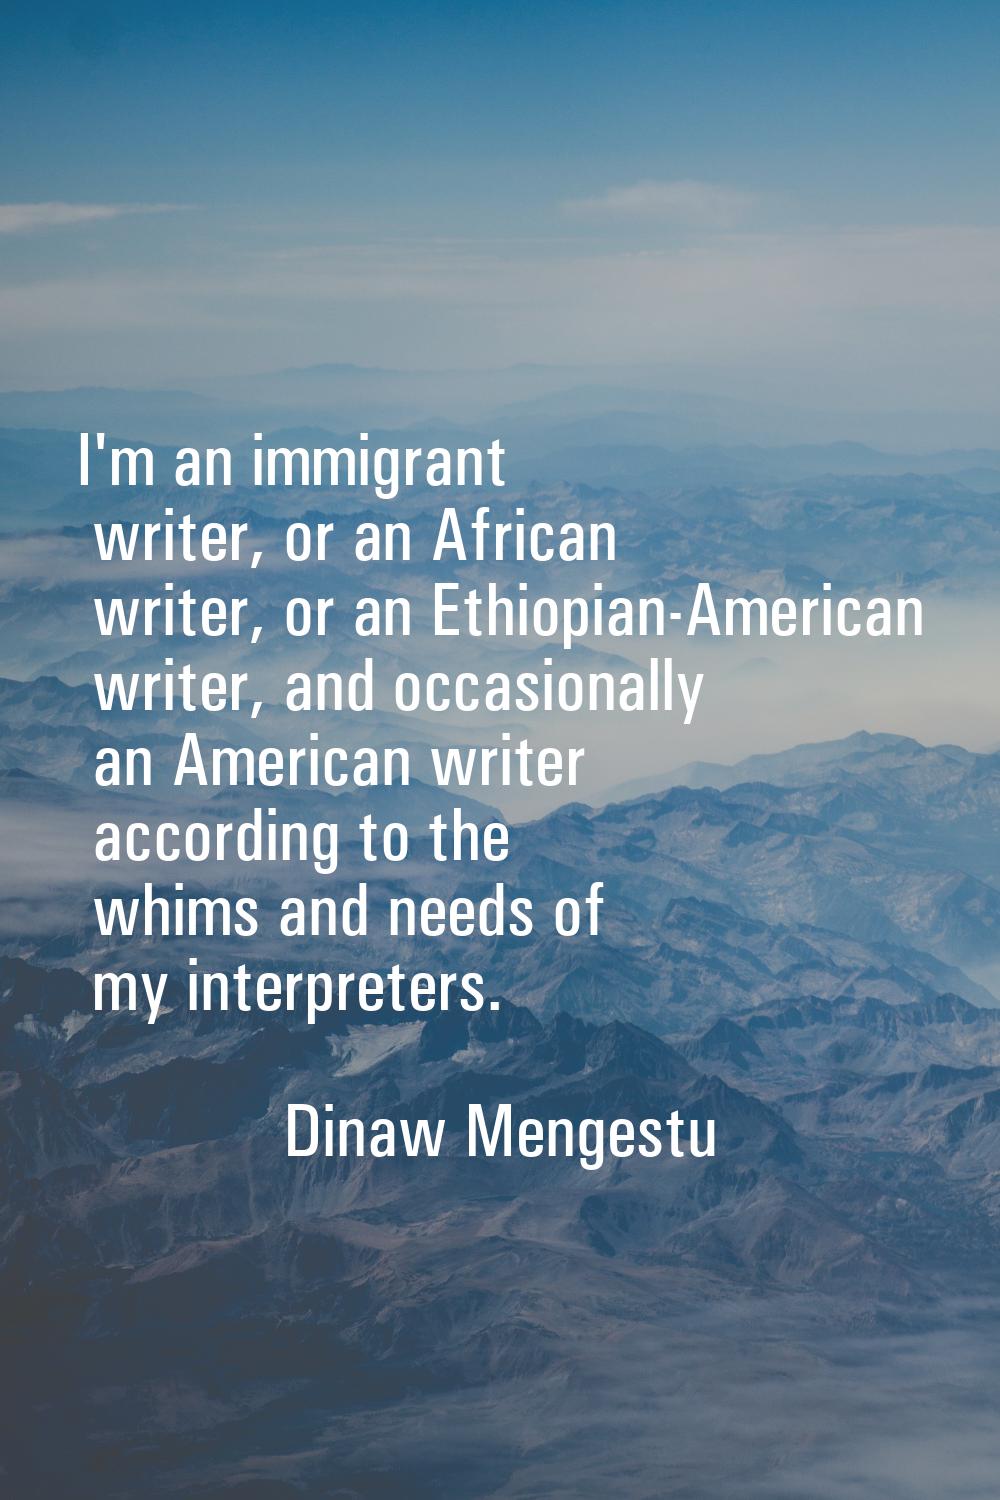 I'm an immigrant writer, or an African writer, or an Ethiopian-American writer, and occasionally an